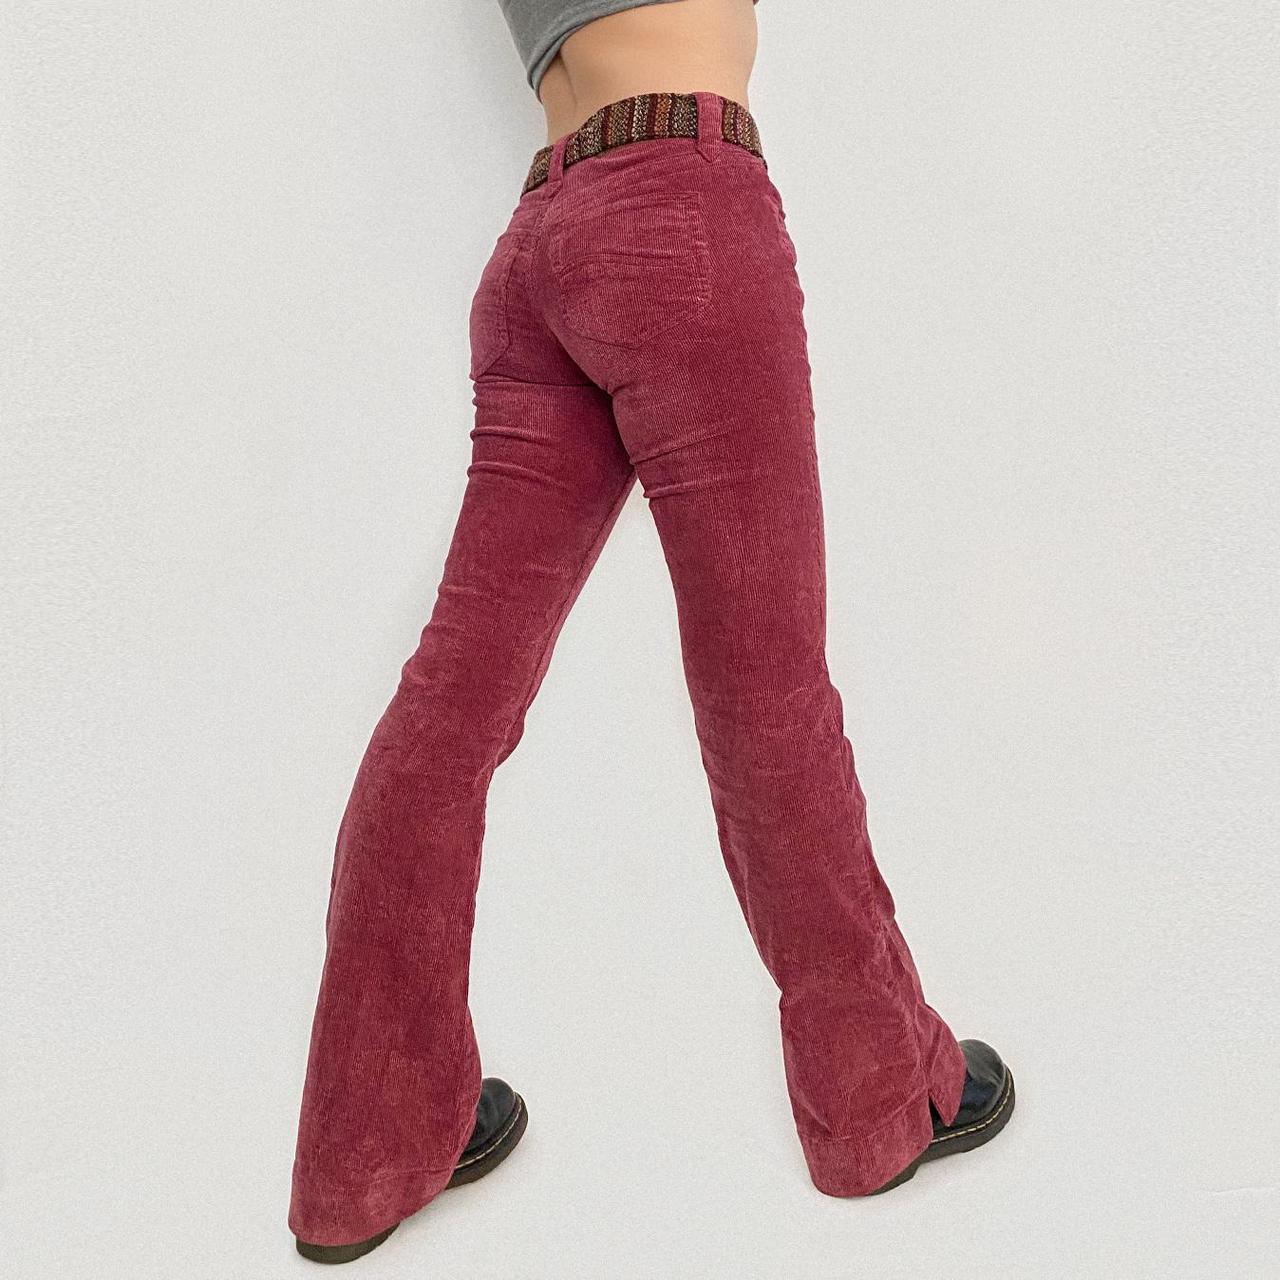 Lee Women's Pink and Burgundy Jeans